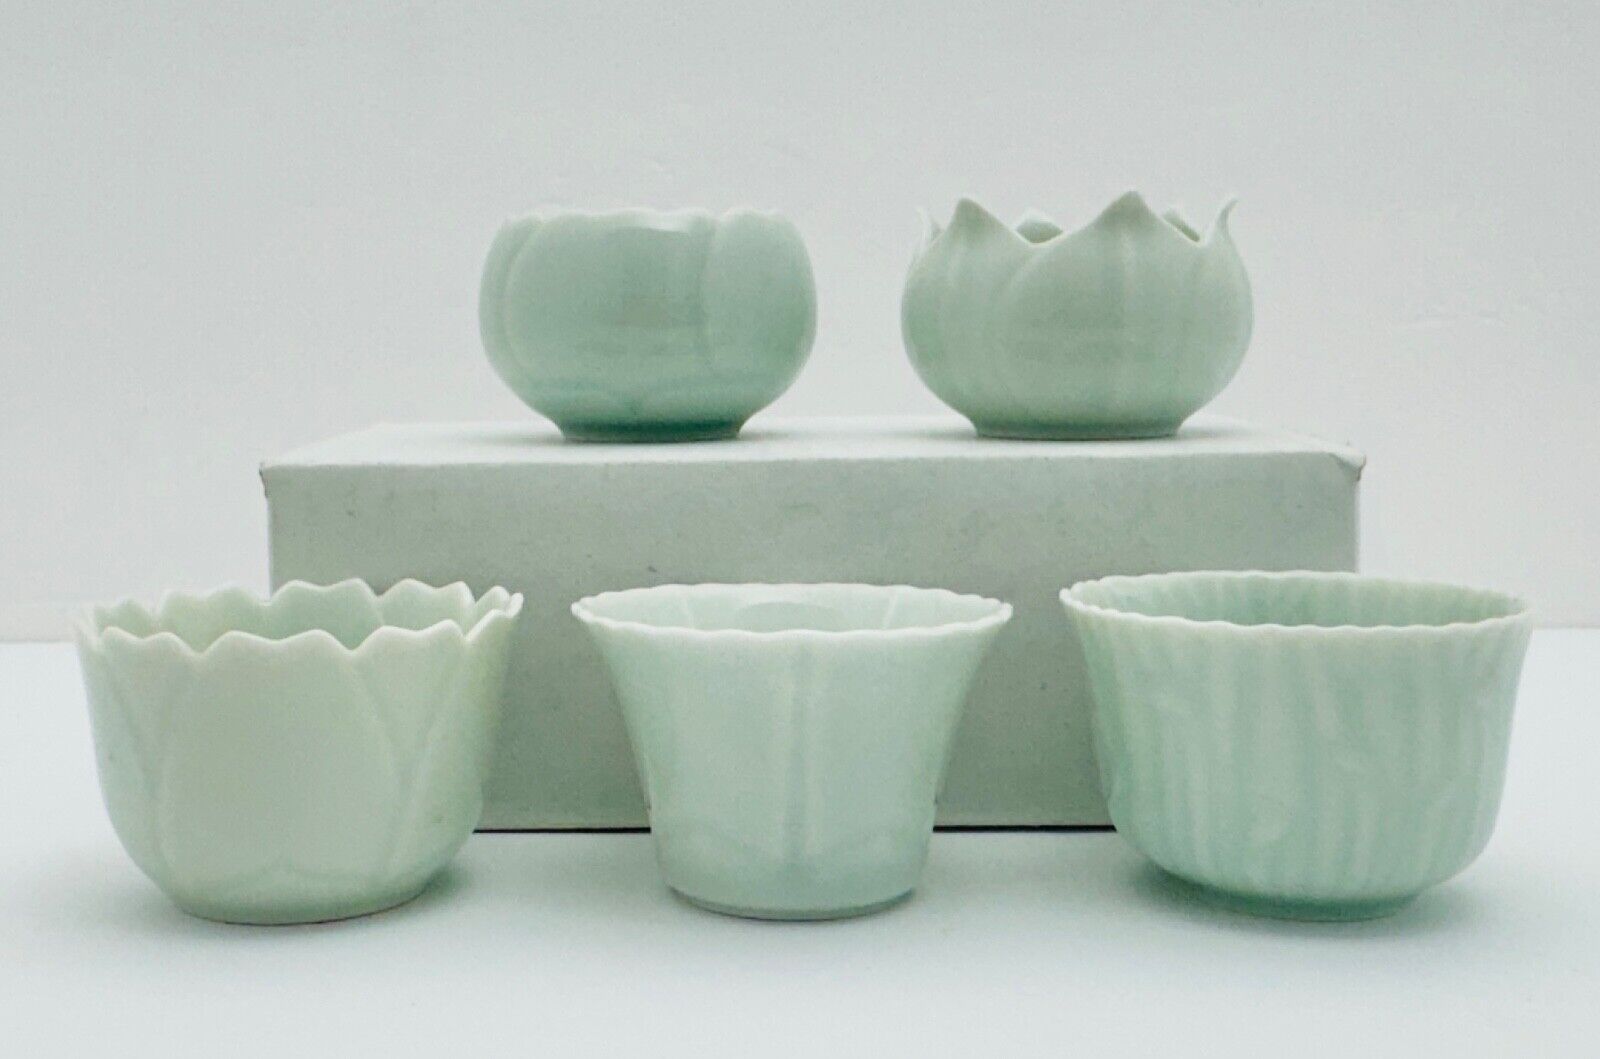 Celadon Lotus Flower Sauce or Small Tea Cups (Set 0f 5) They hold 1.7 oz